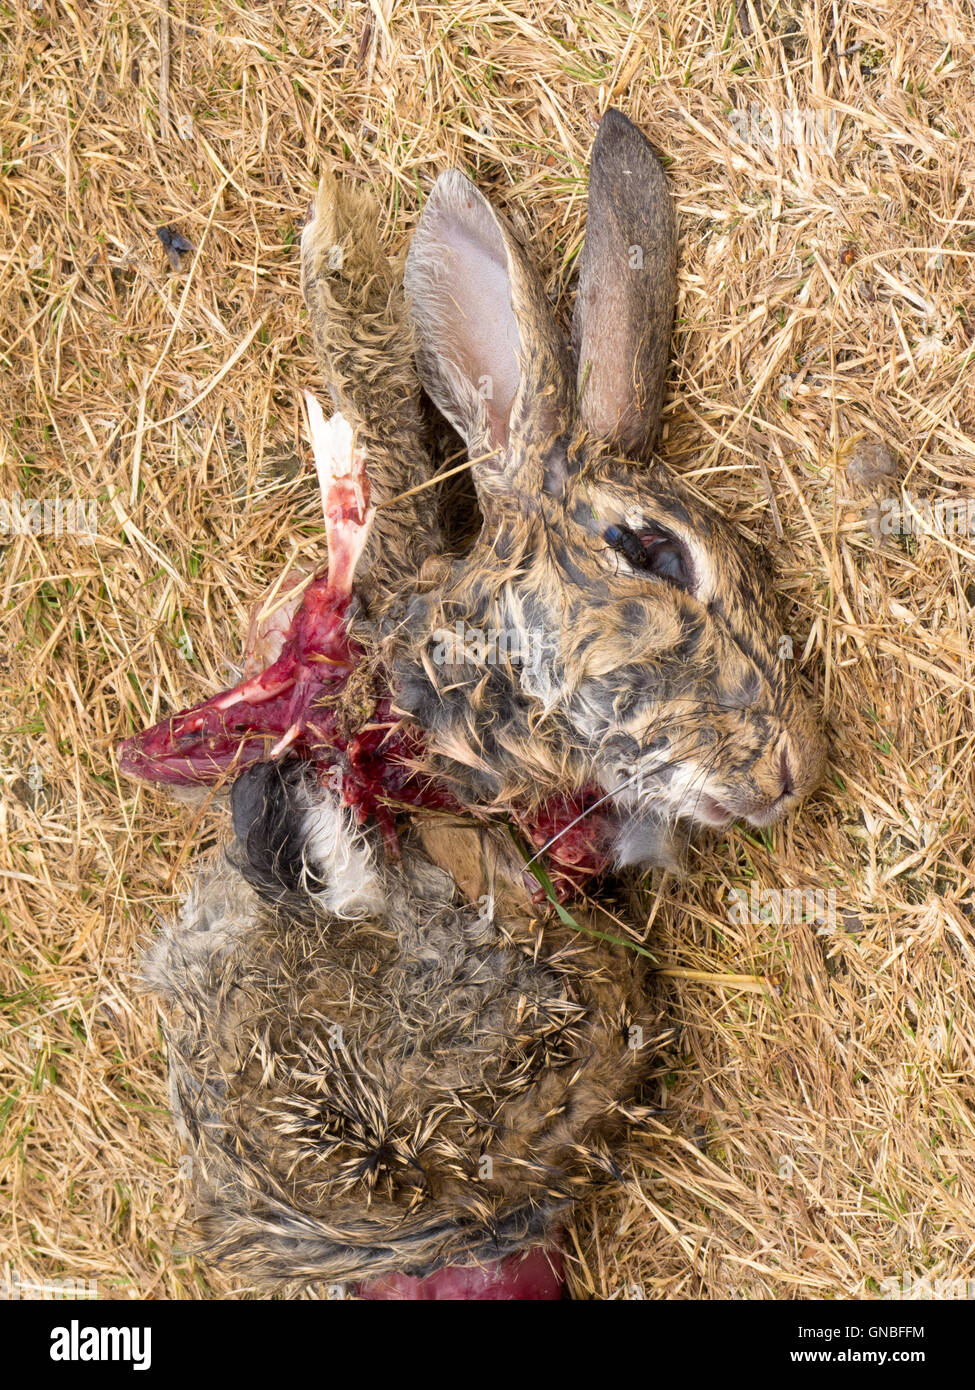 Easter bunny is dead, carcass of mutilated rabbit Stock Photo